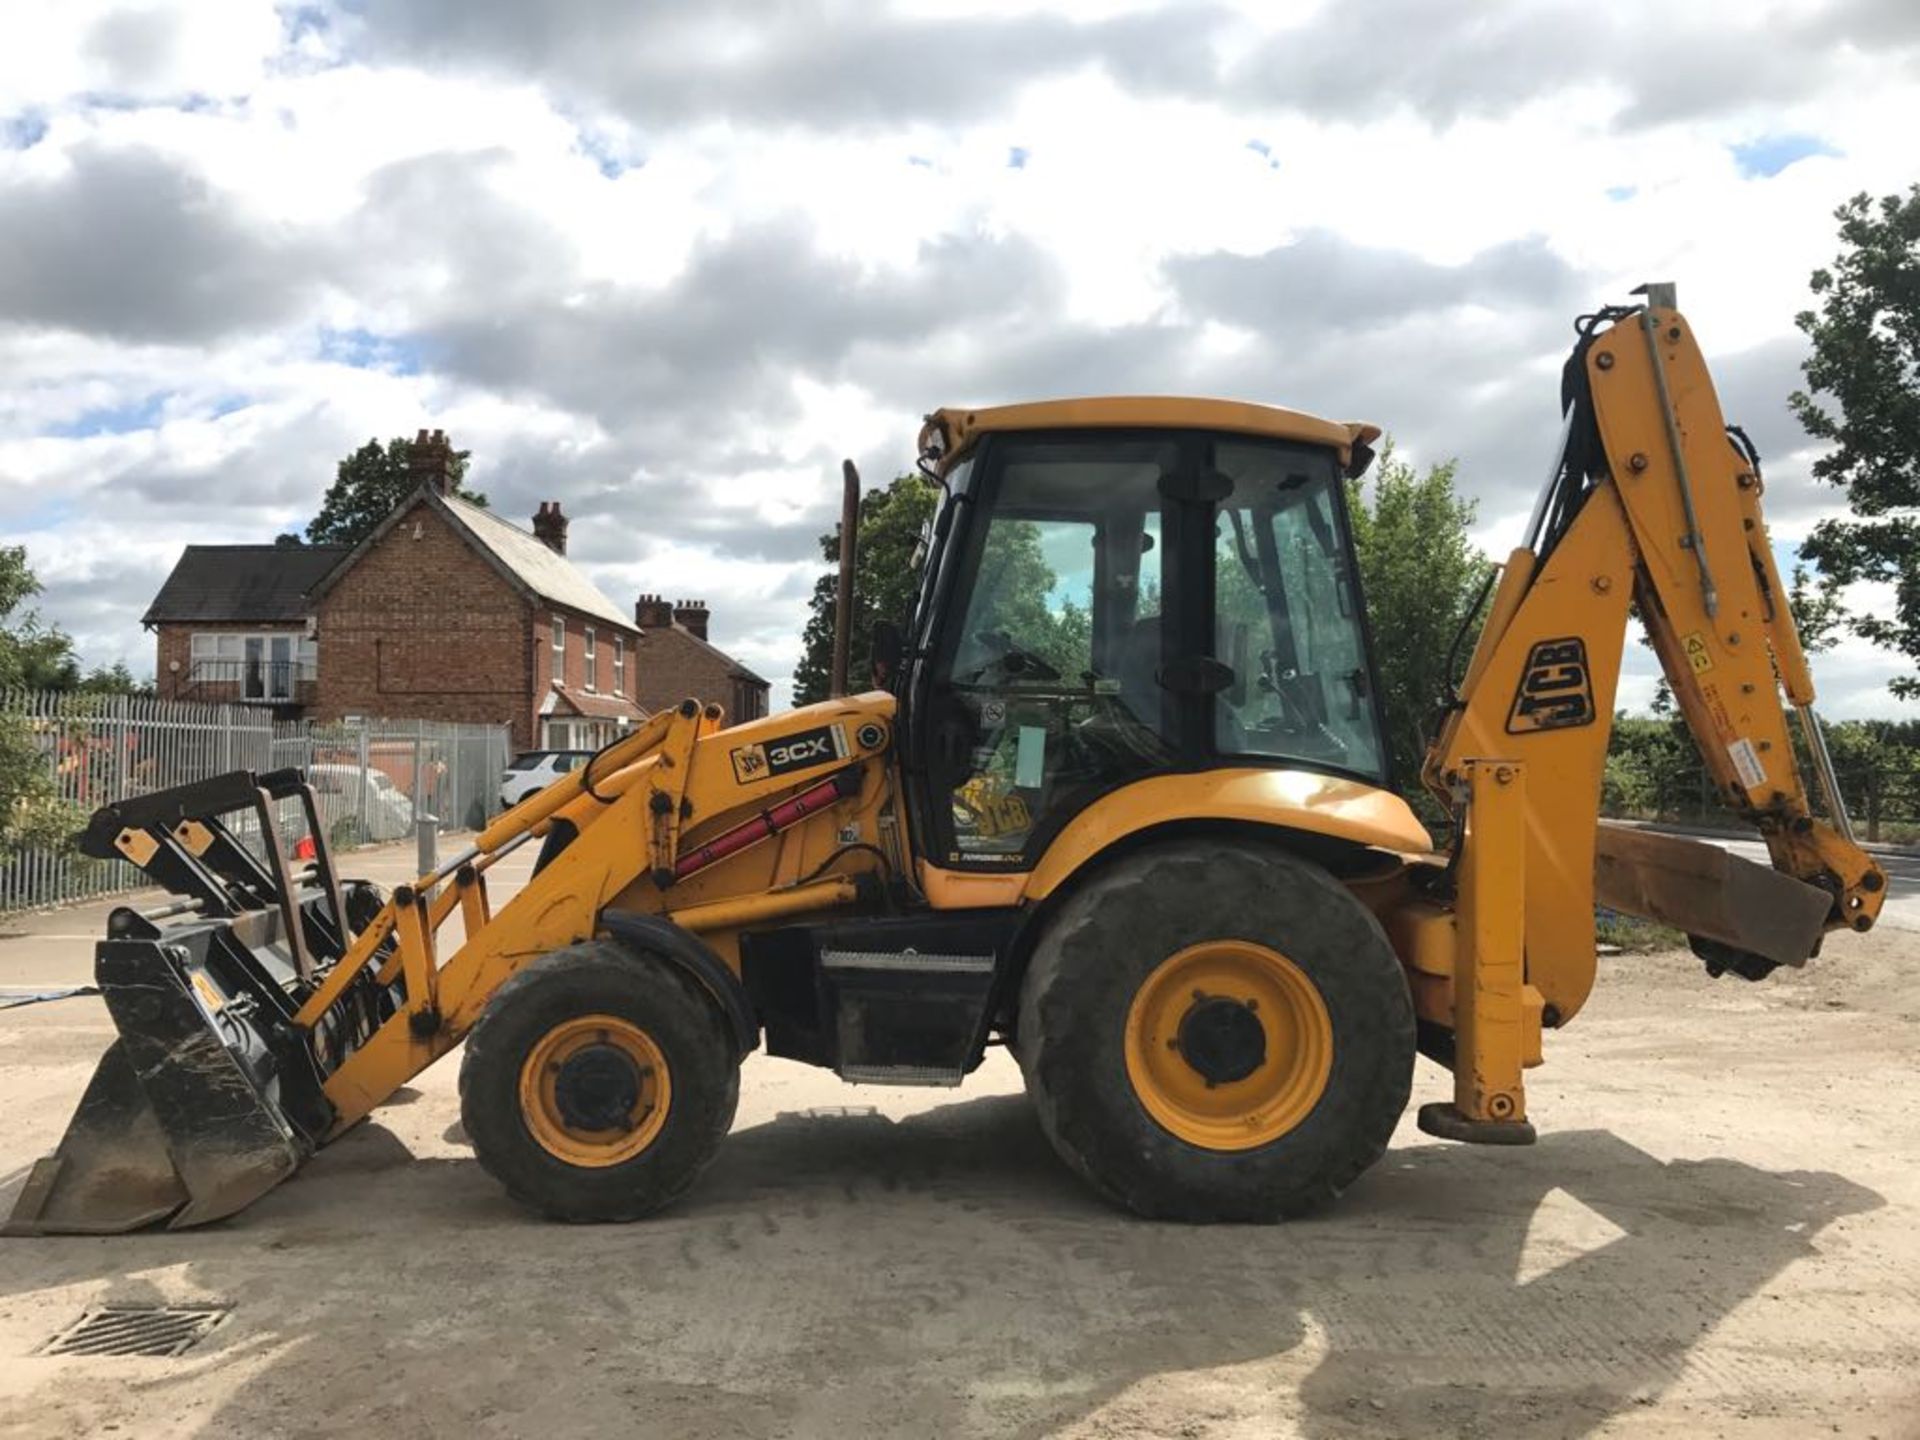 2007 JCB 3CX Digger Loader c/w extending diiper arm, piped, 4 in 1 bucket, turbo Power Shift, torque - Image 6 of 8